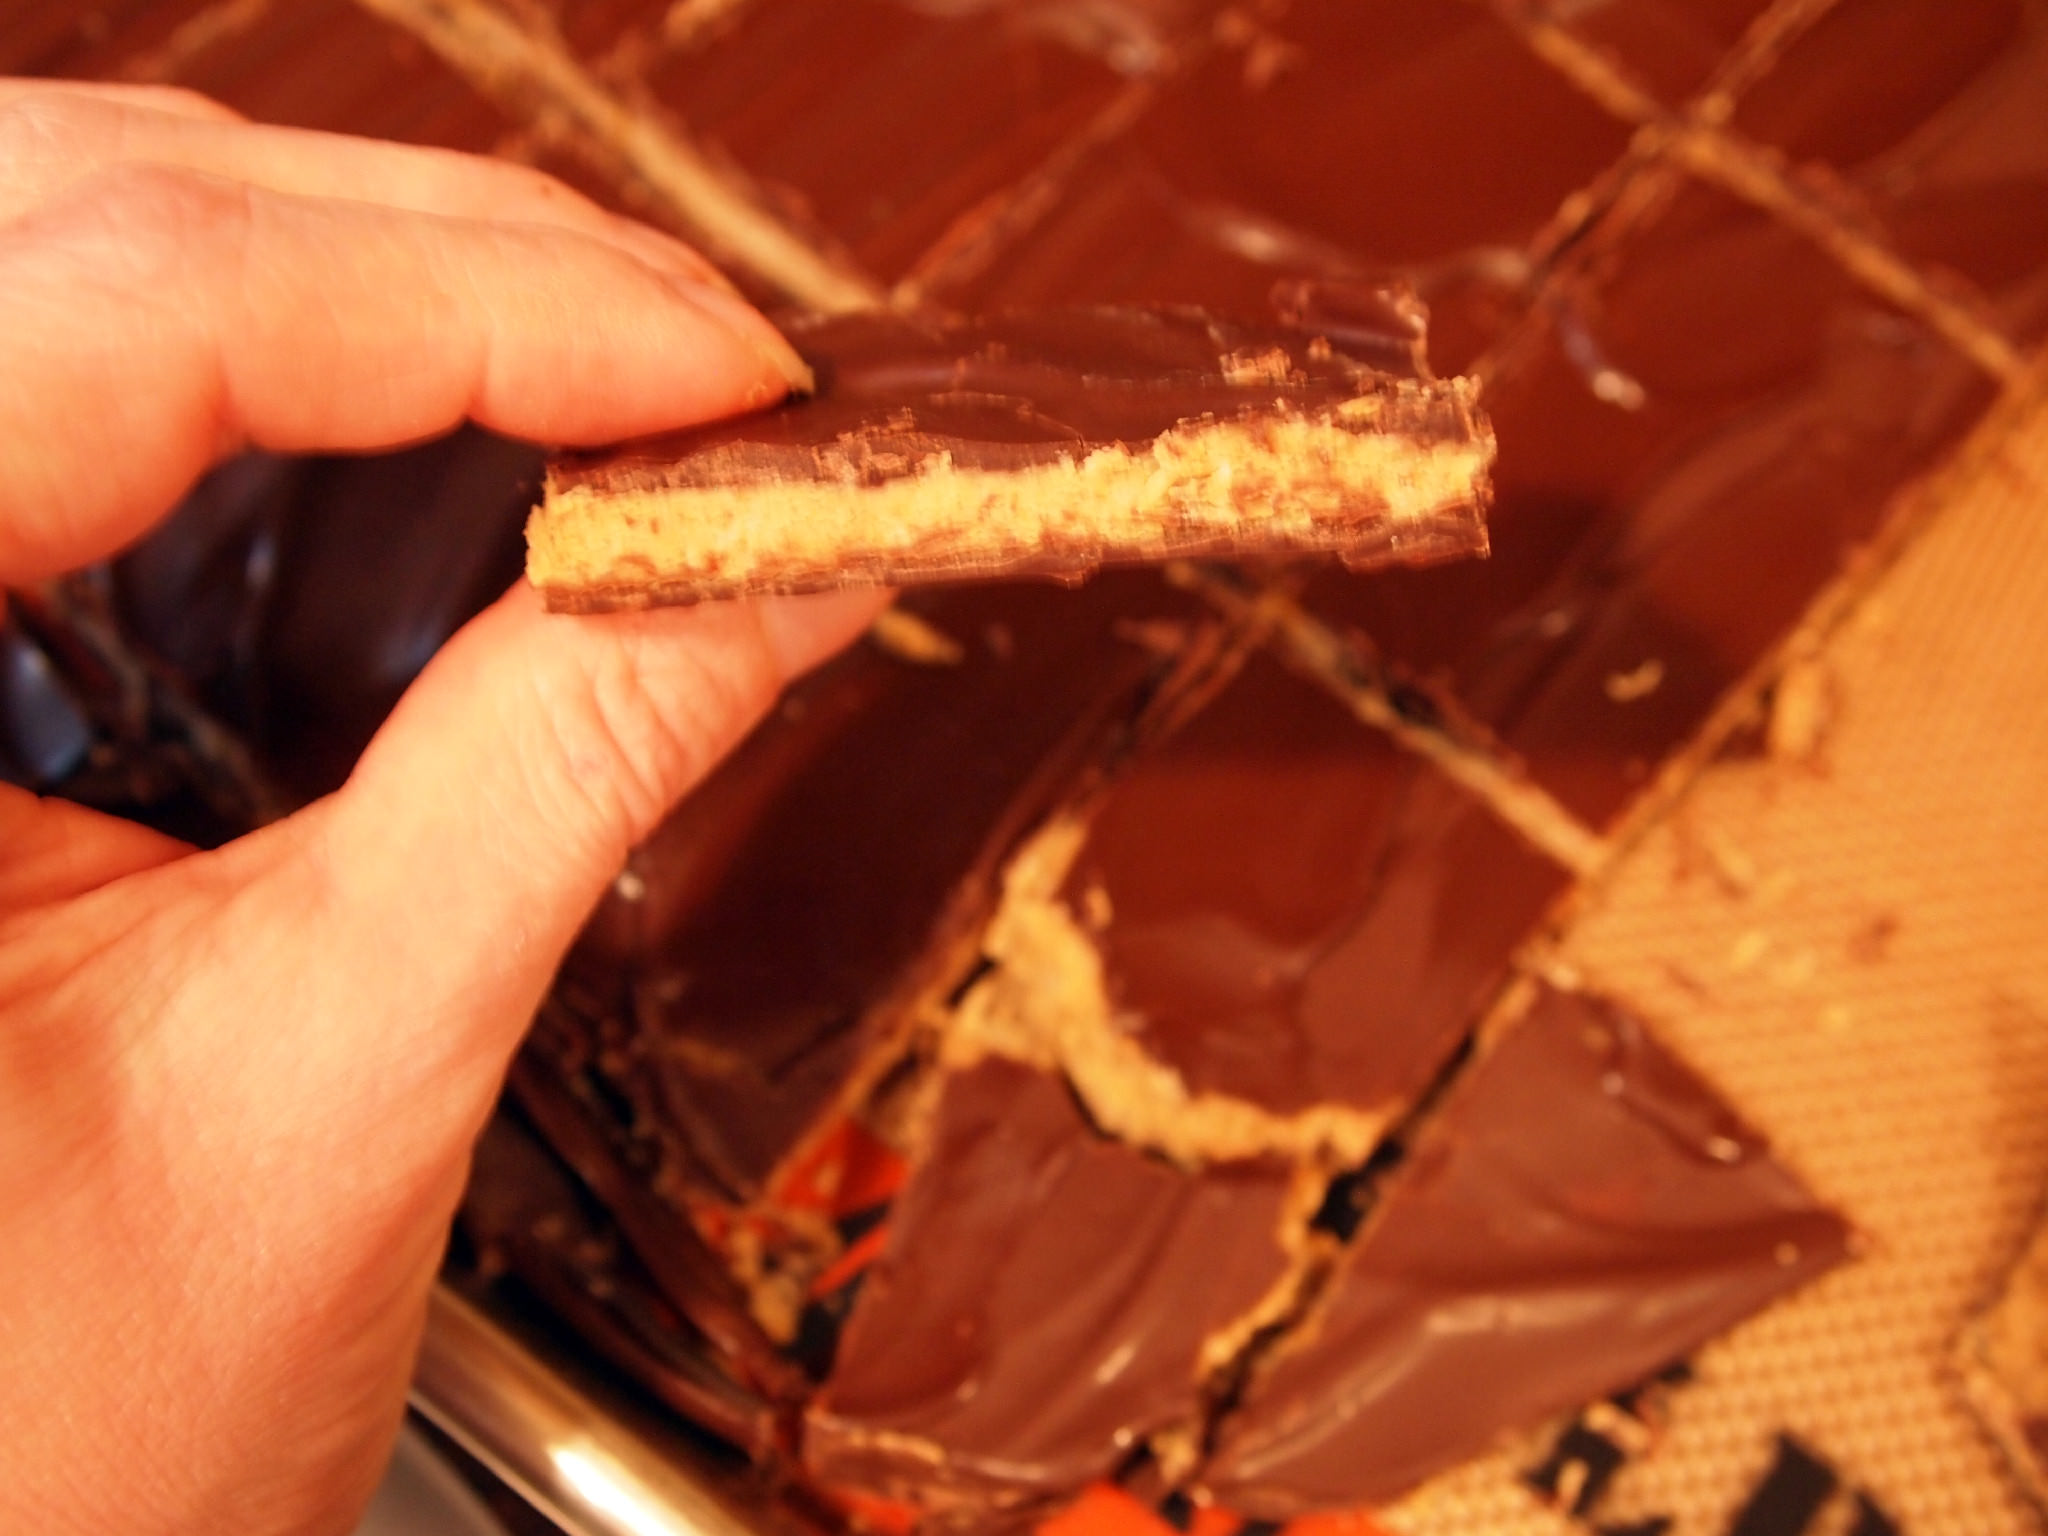 Dark chocolate SunButter candy bars will stuff your Easter baskets with sweet, homemade chocolate candy bar goodness!